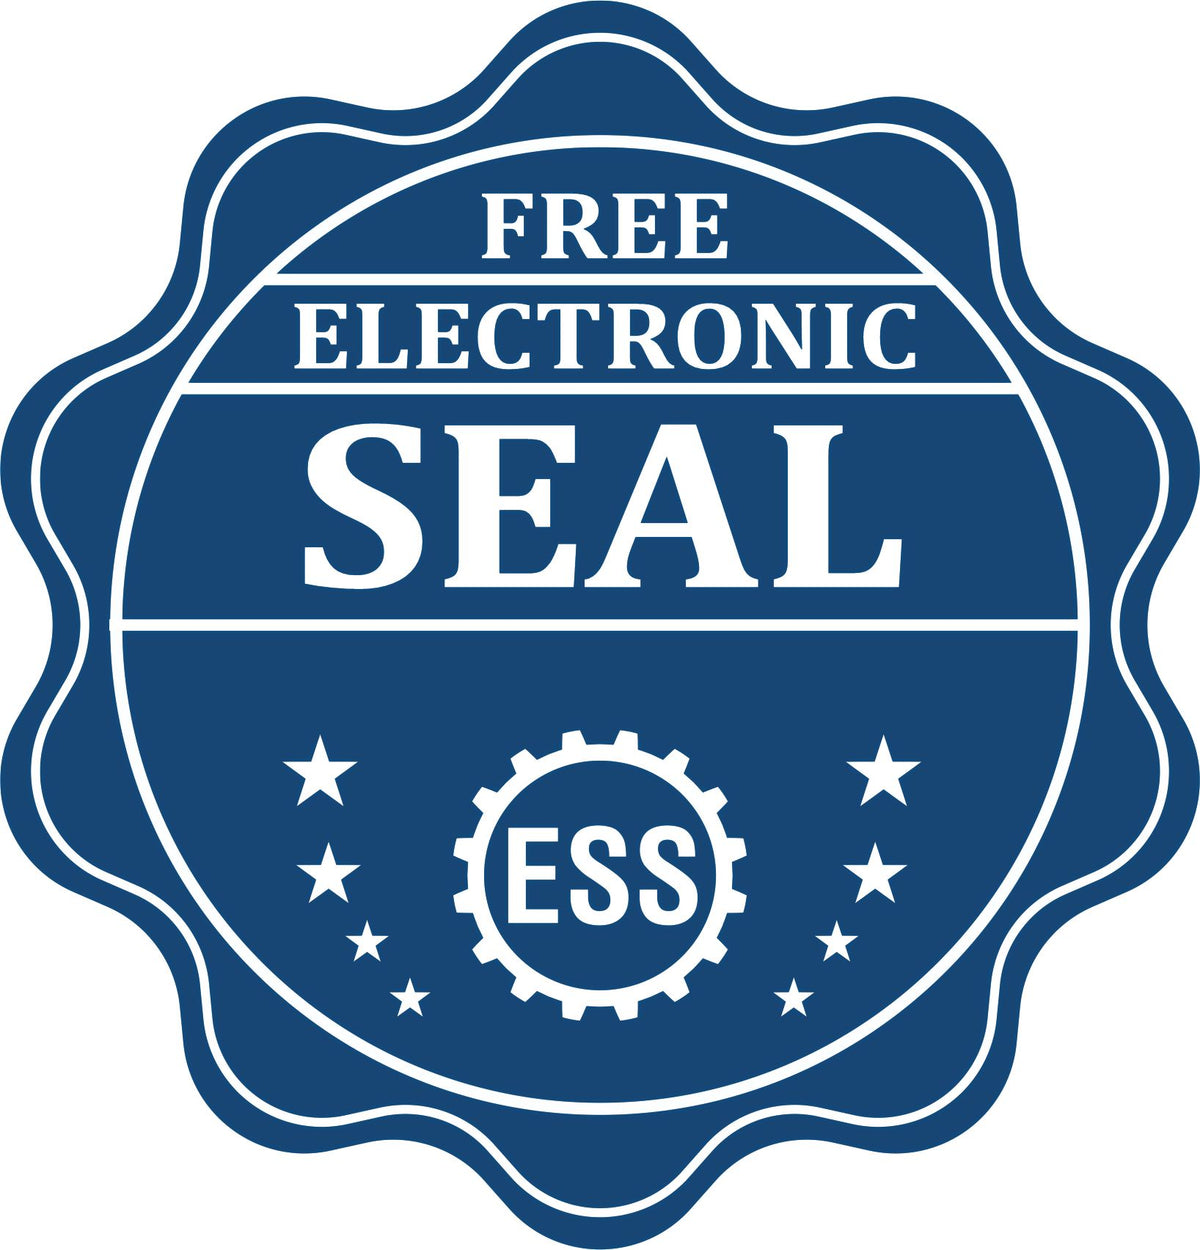 A badge showing a free electronic seal for the Wooden Handle Michigan State Seal Notary Public Stamp with stars and the ESS gear on the emblem.